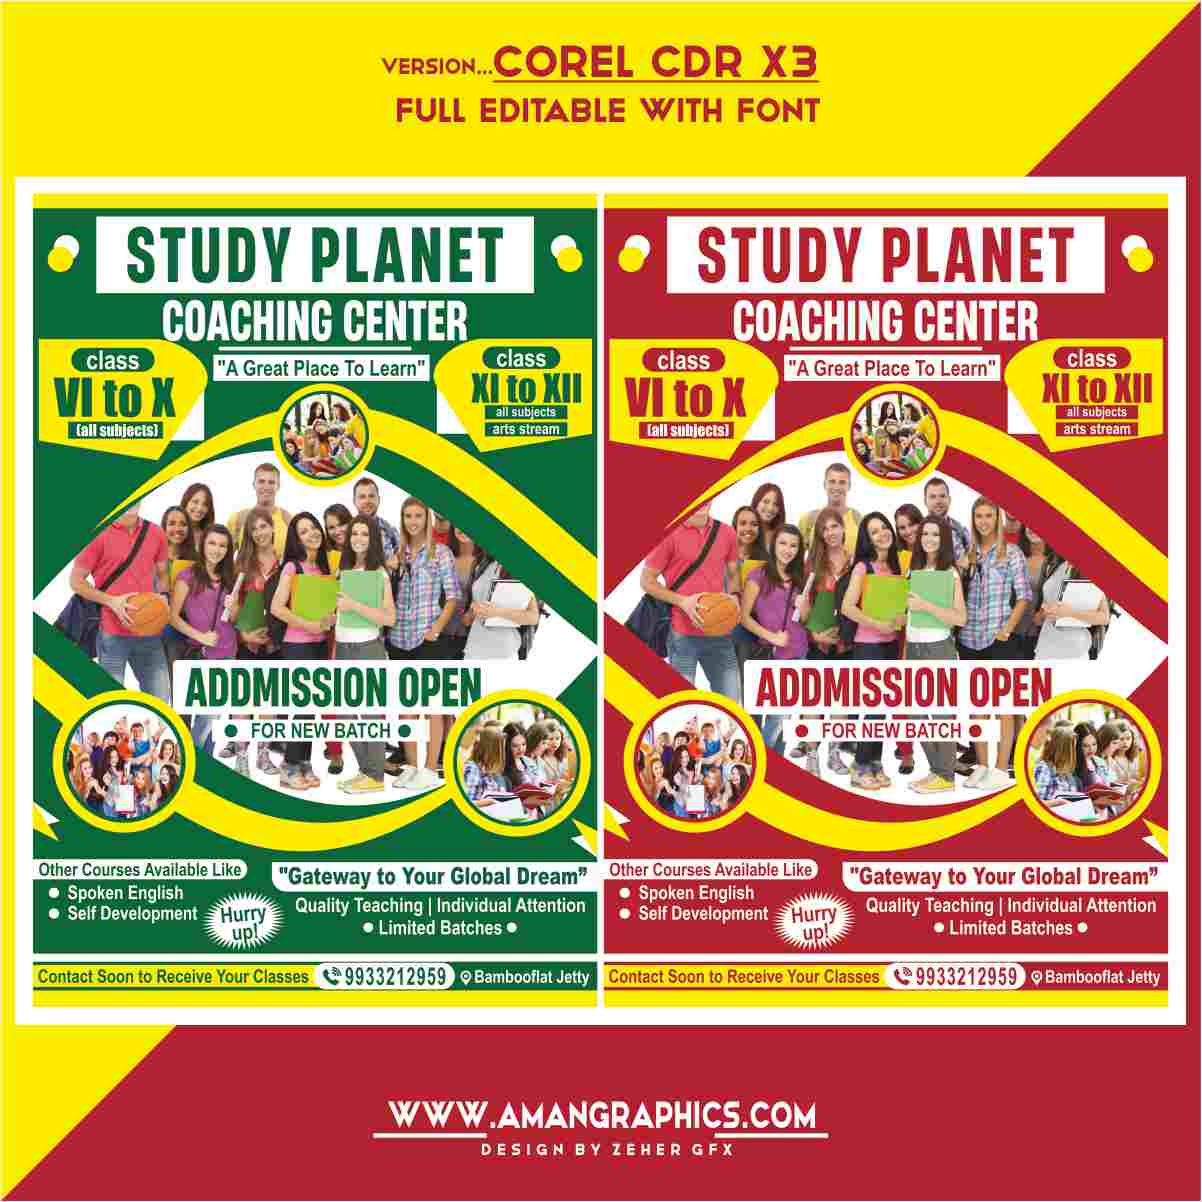 Study Planet Coaching Center Pamphlet Design Cdr File